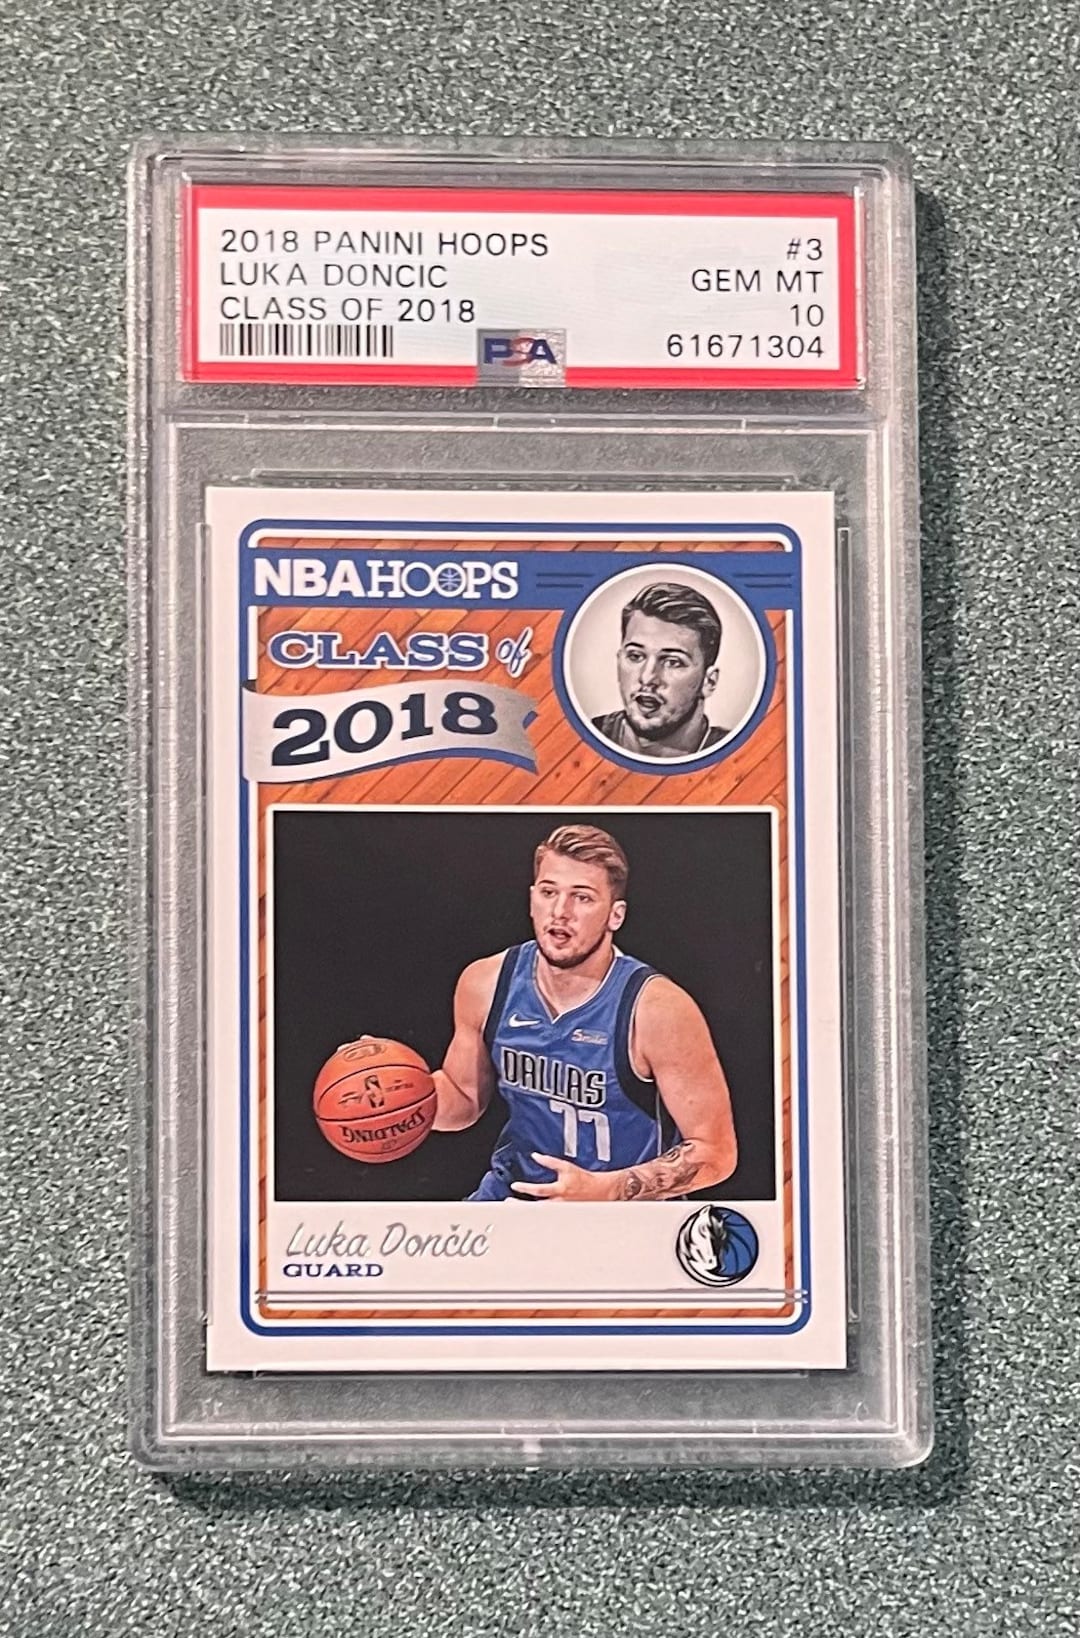 Luca Doncic Signed Autographed Dallas Mavericks Rated Rookie -  Norway